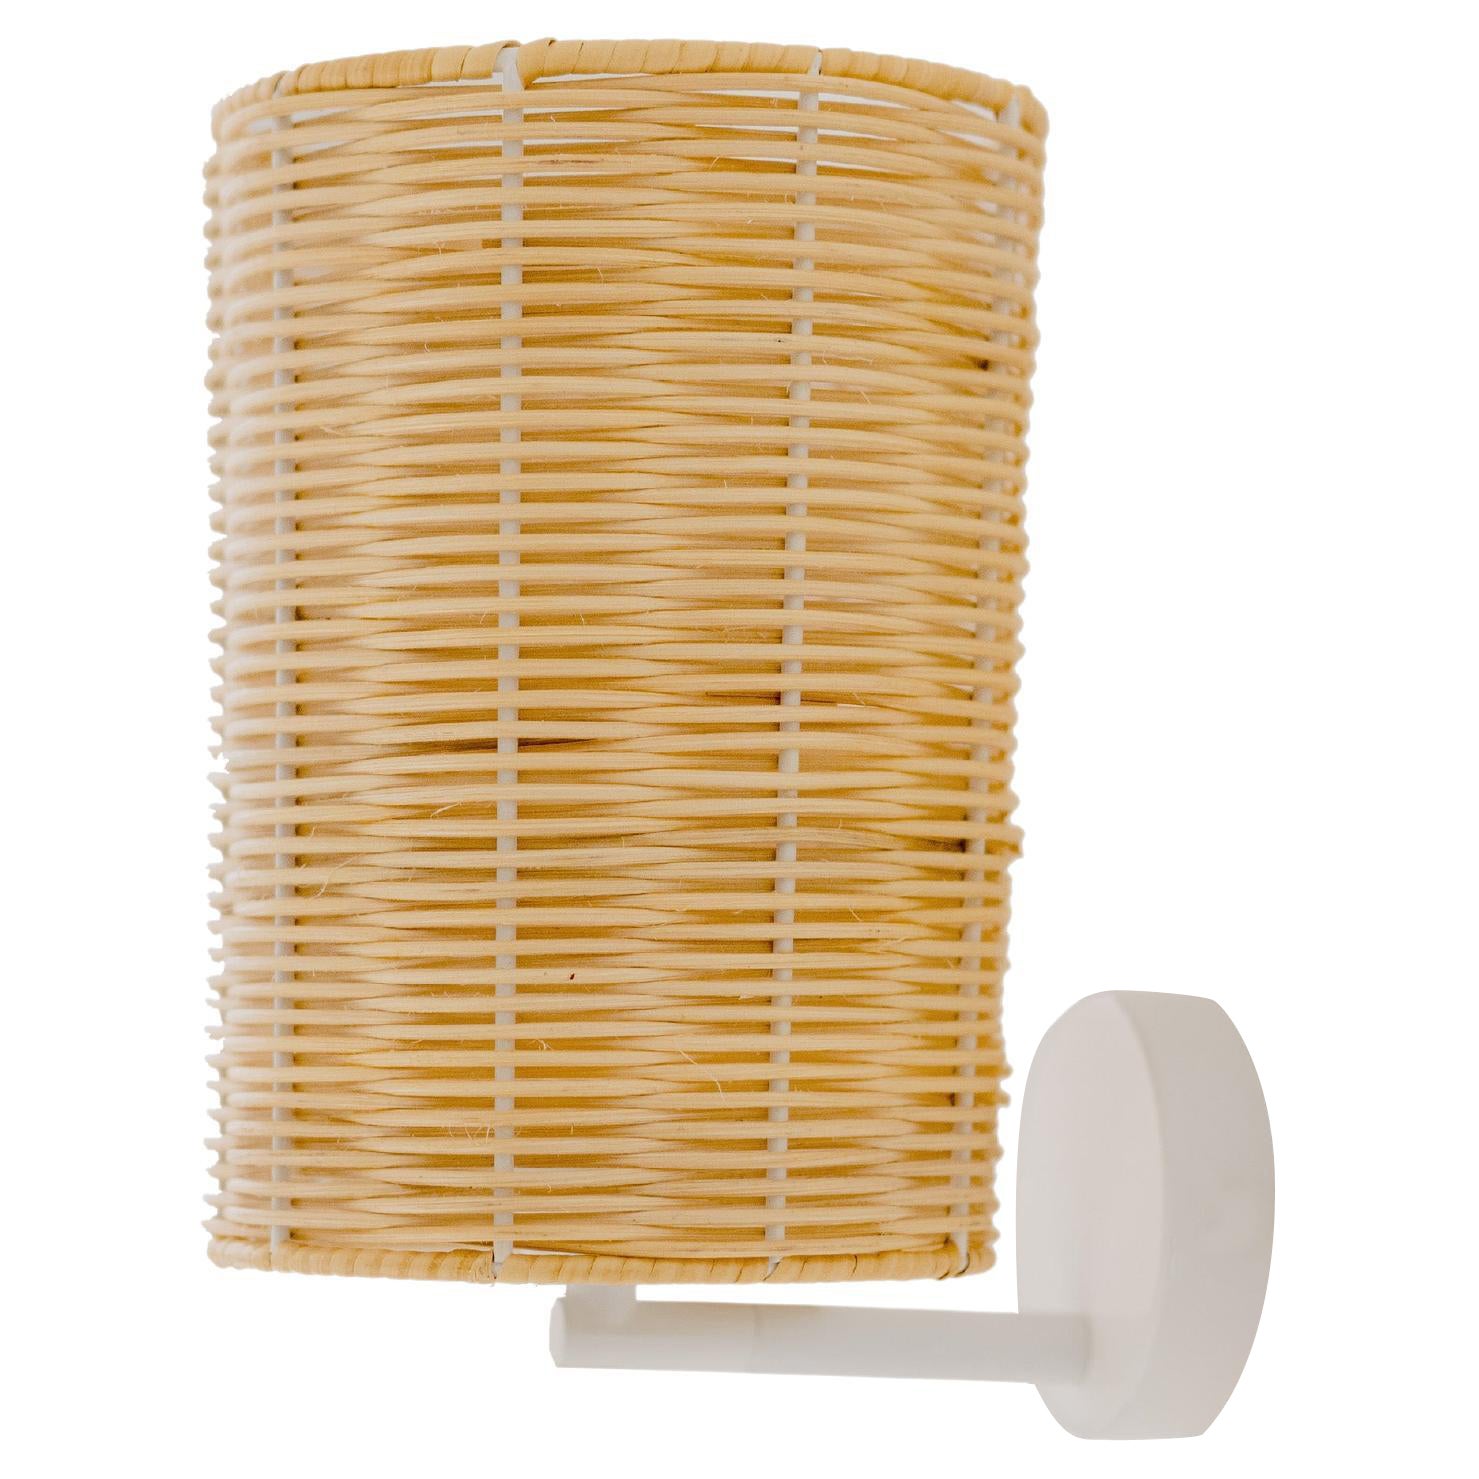 Ands for Objects fors Contemporary, Handmade, Wall Lamp, Rattan Cylinder, by Mediterranean Objects en vente